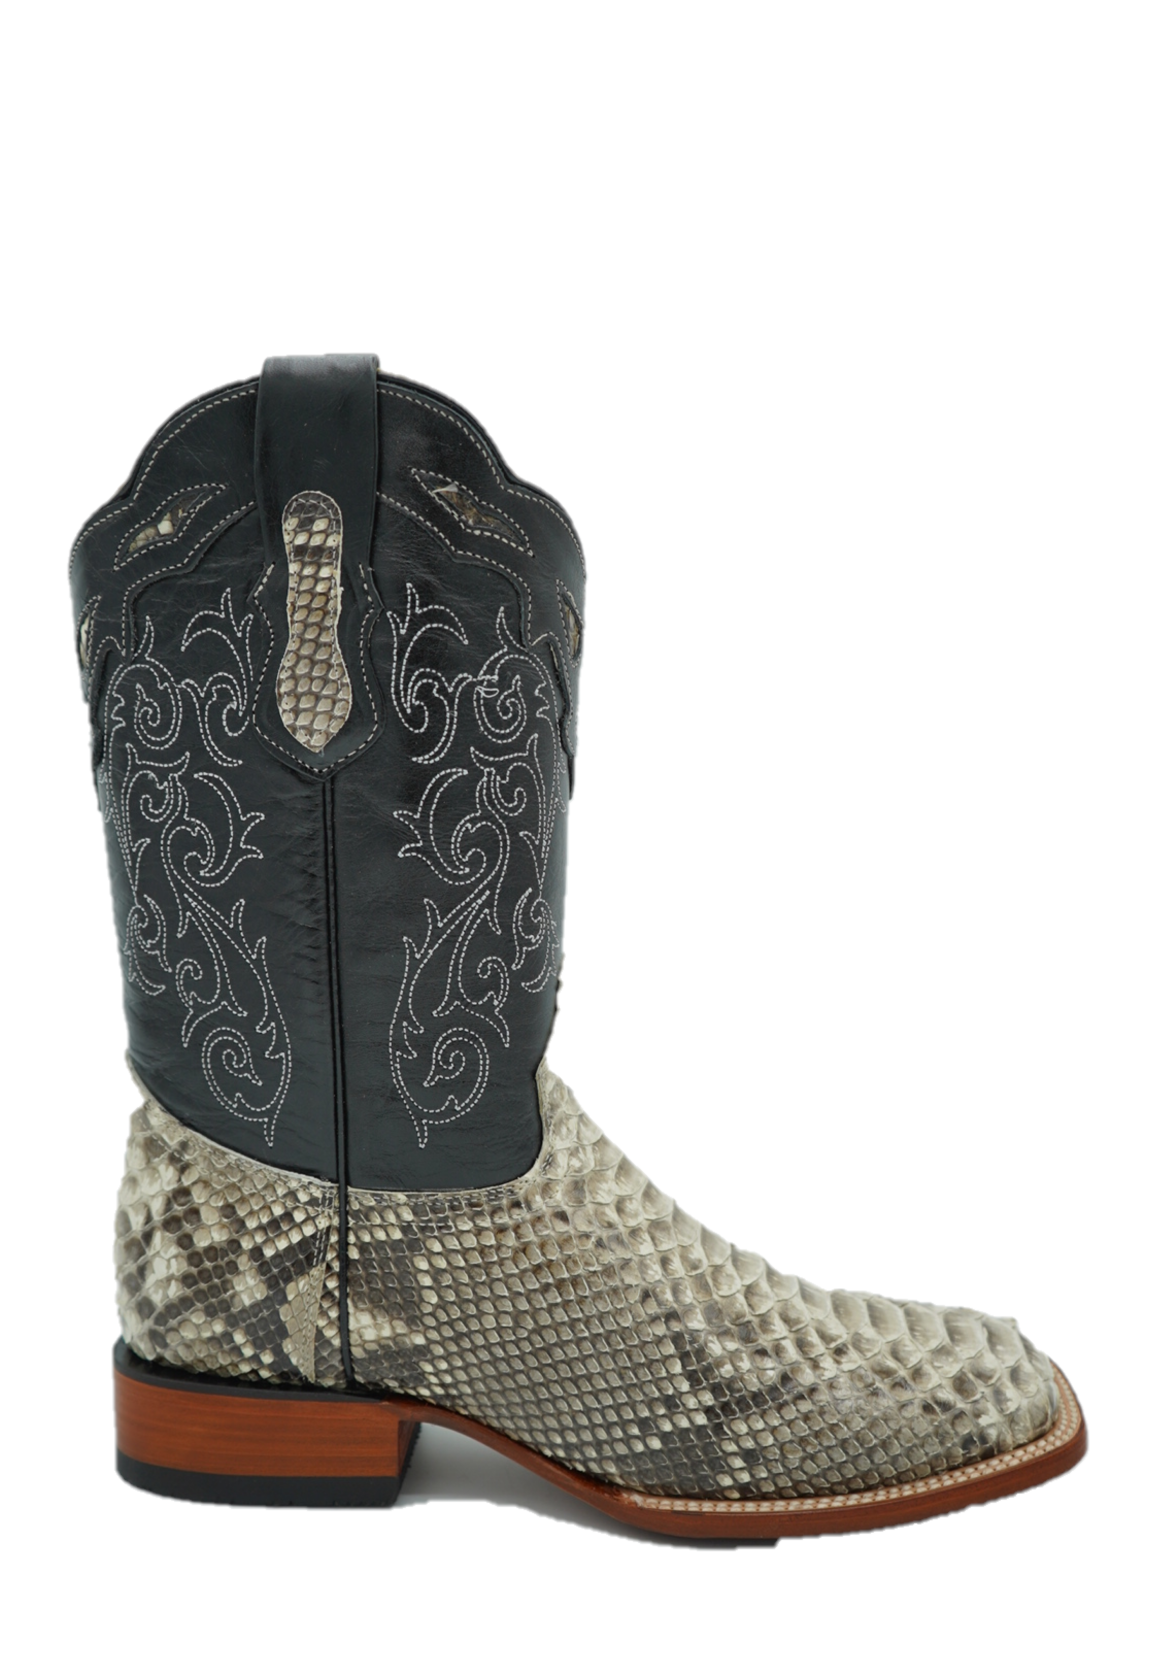 Python Wide Square Toe Boot in a Natural Finish